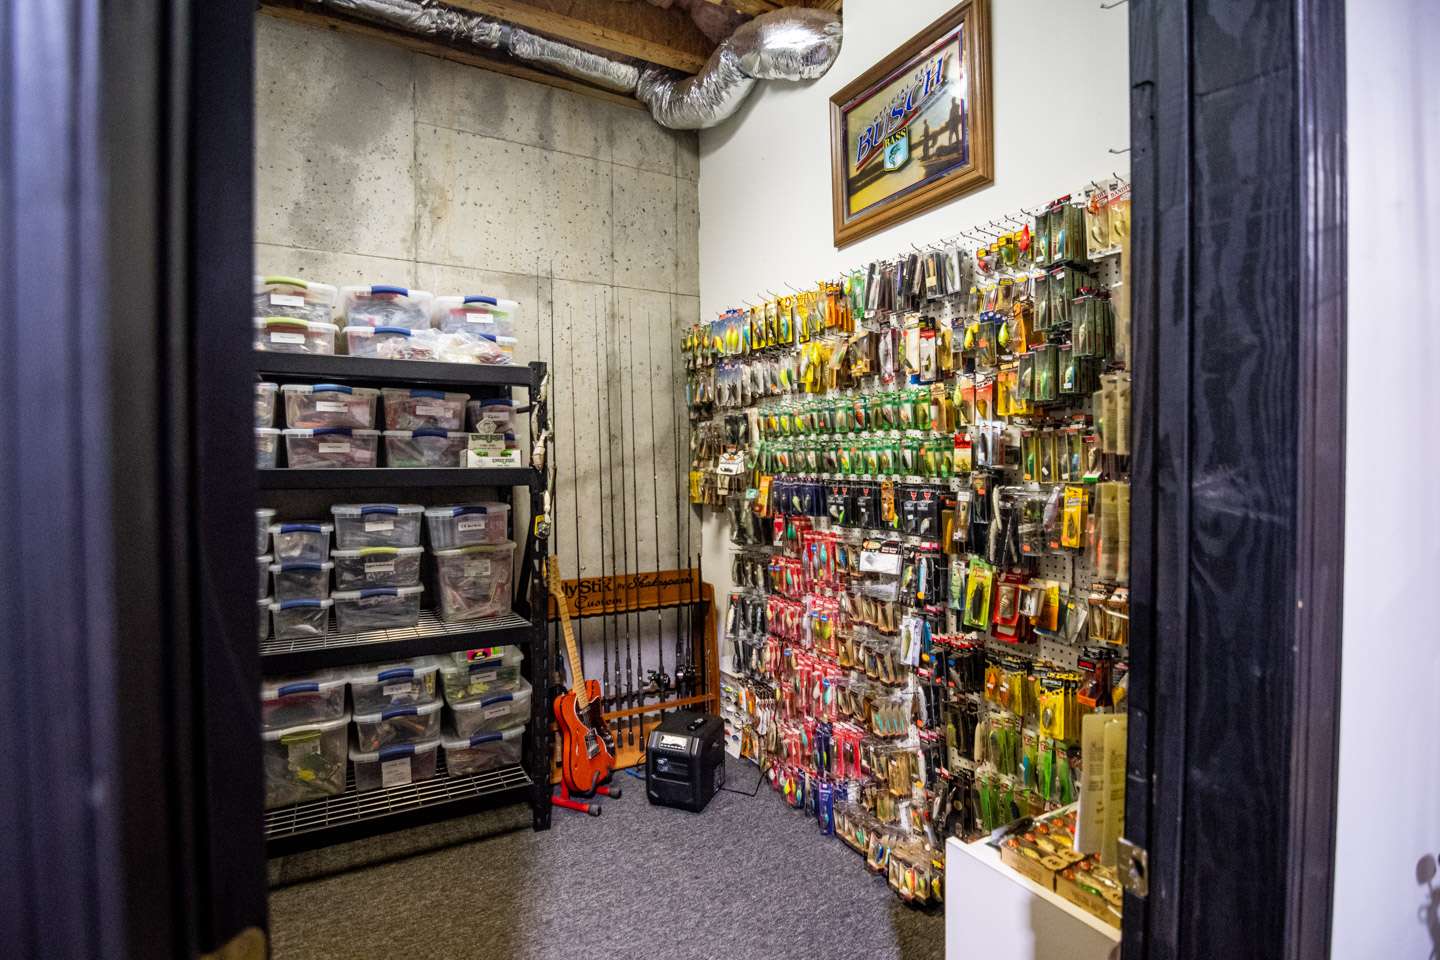 The back of the garage on the right opens into the tournament tackle storage room. This room is organized with pegboards for hanging lure packages and metal shelves for stacking boxes of tackle.